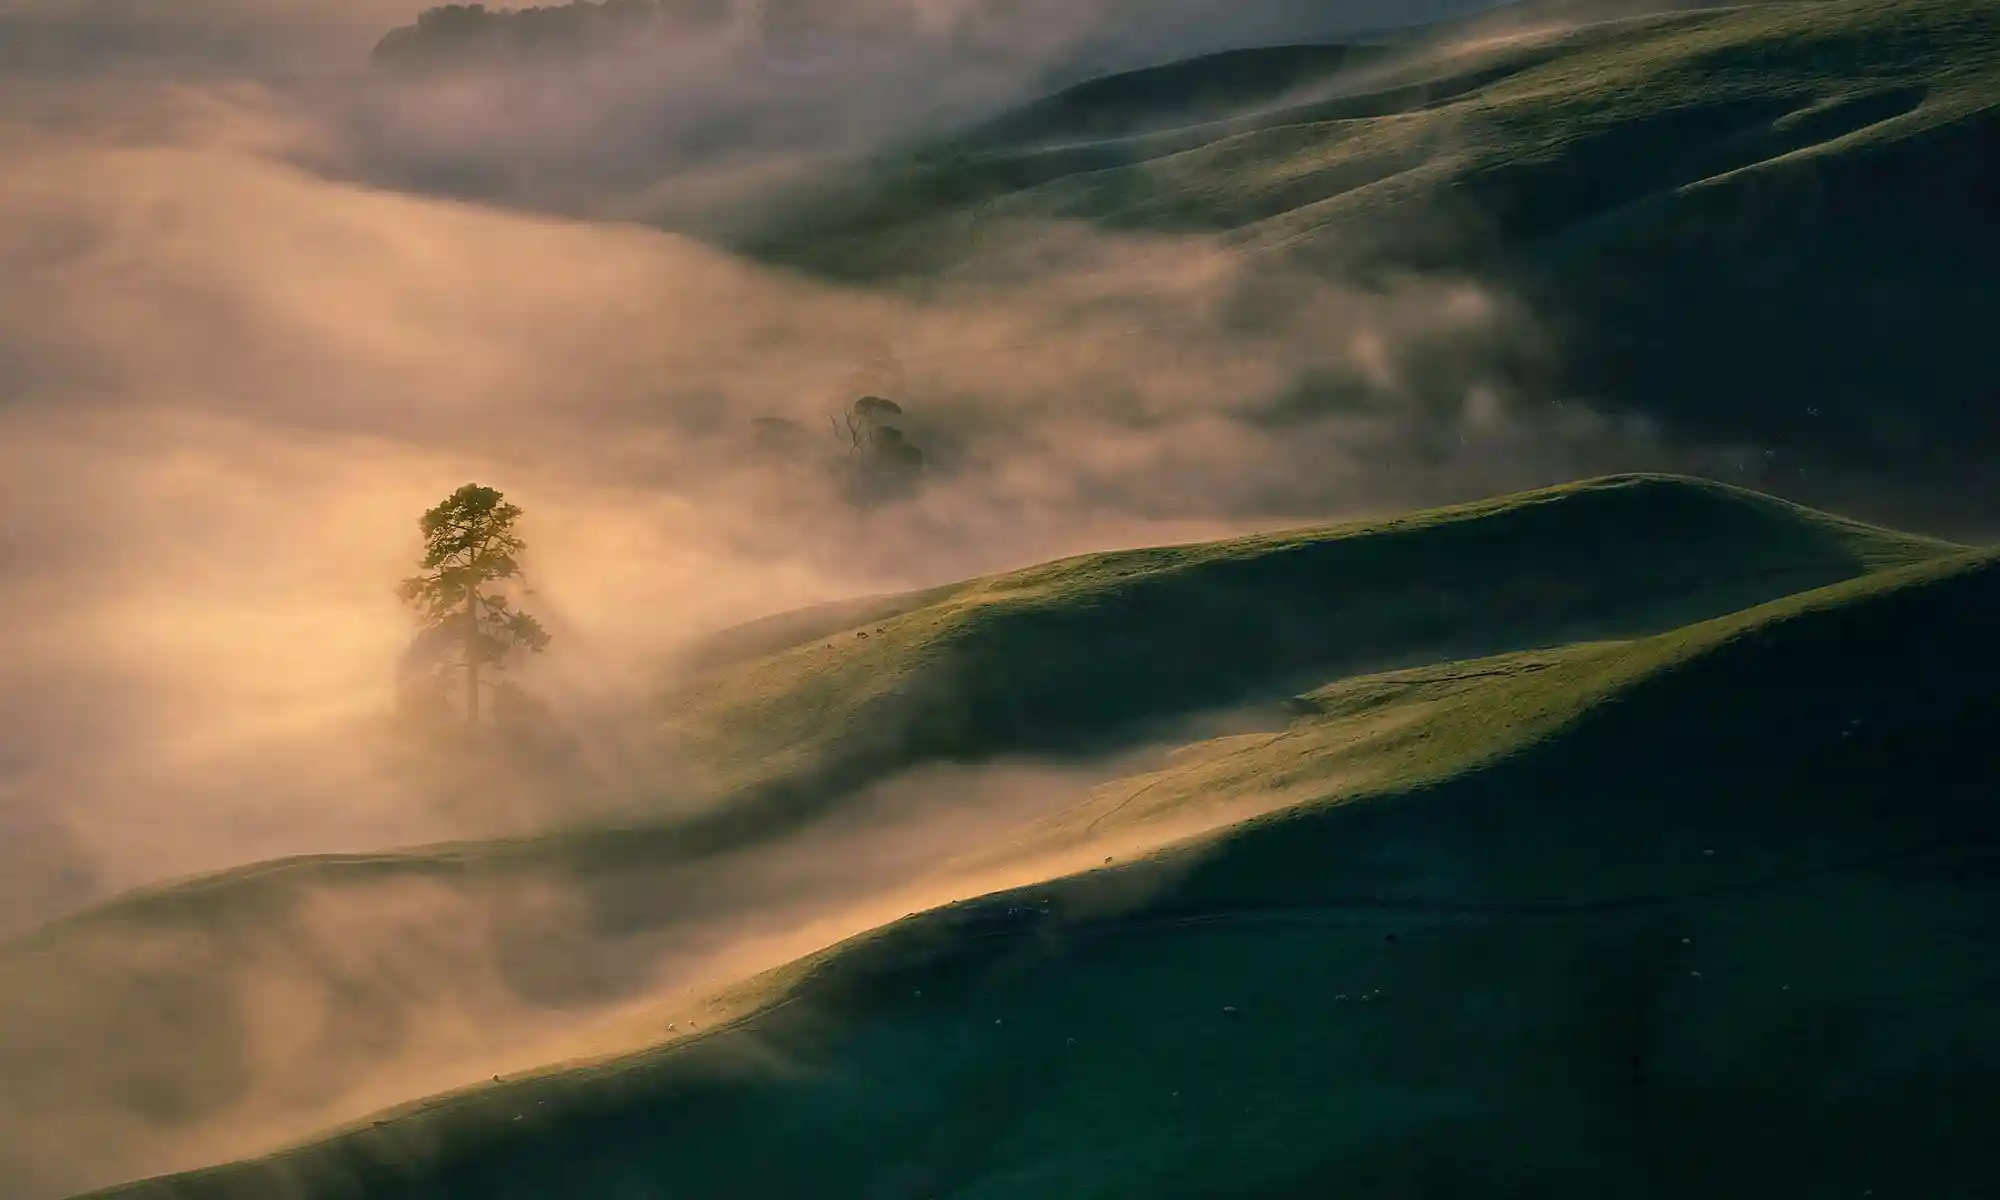 Tree and Morning Mist